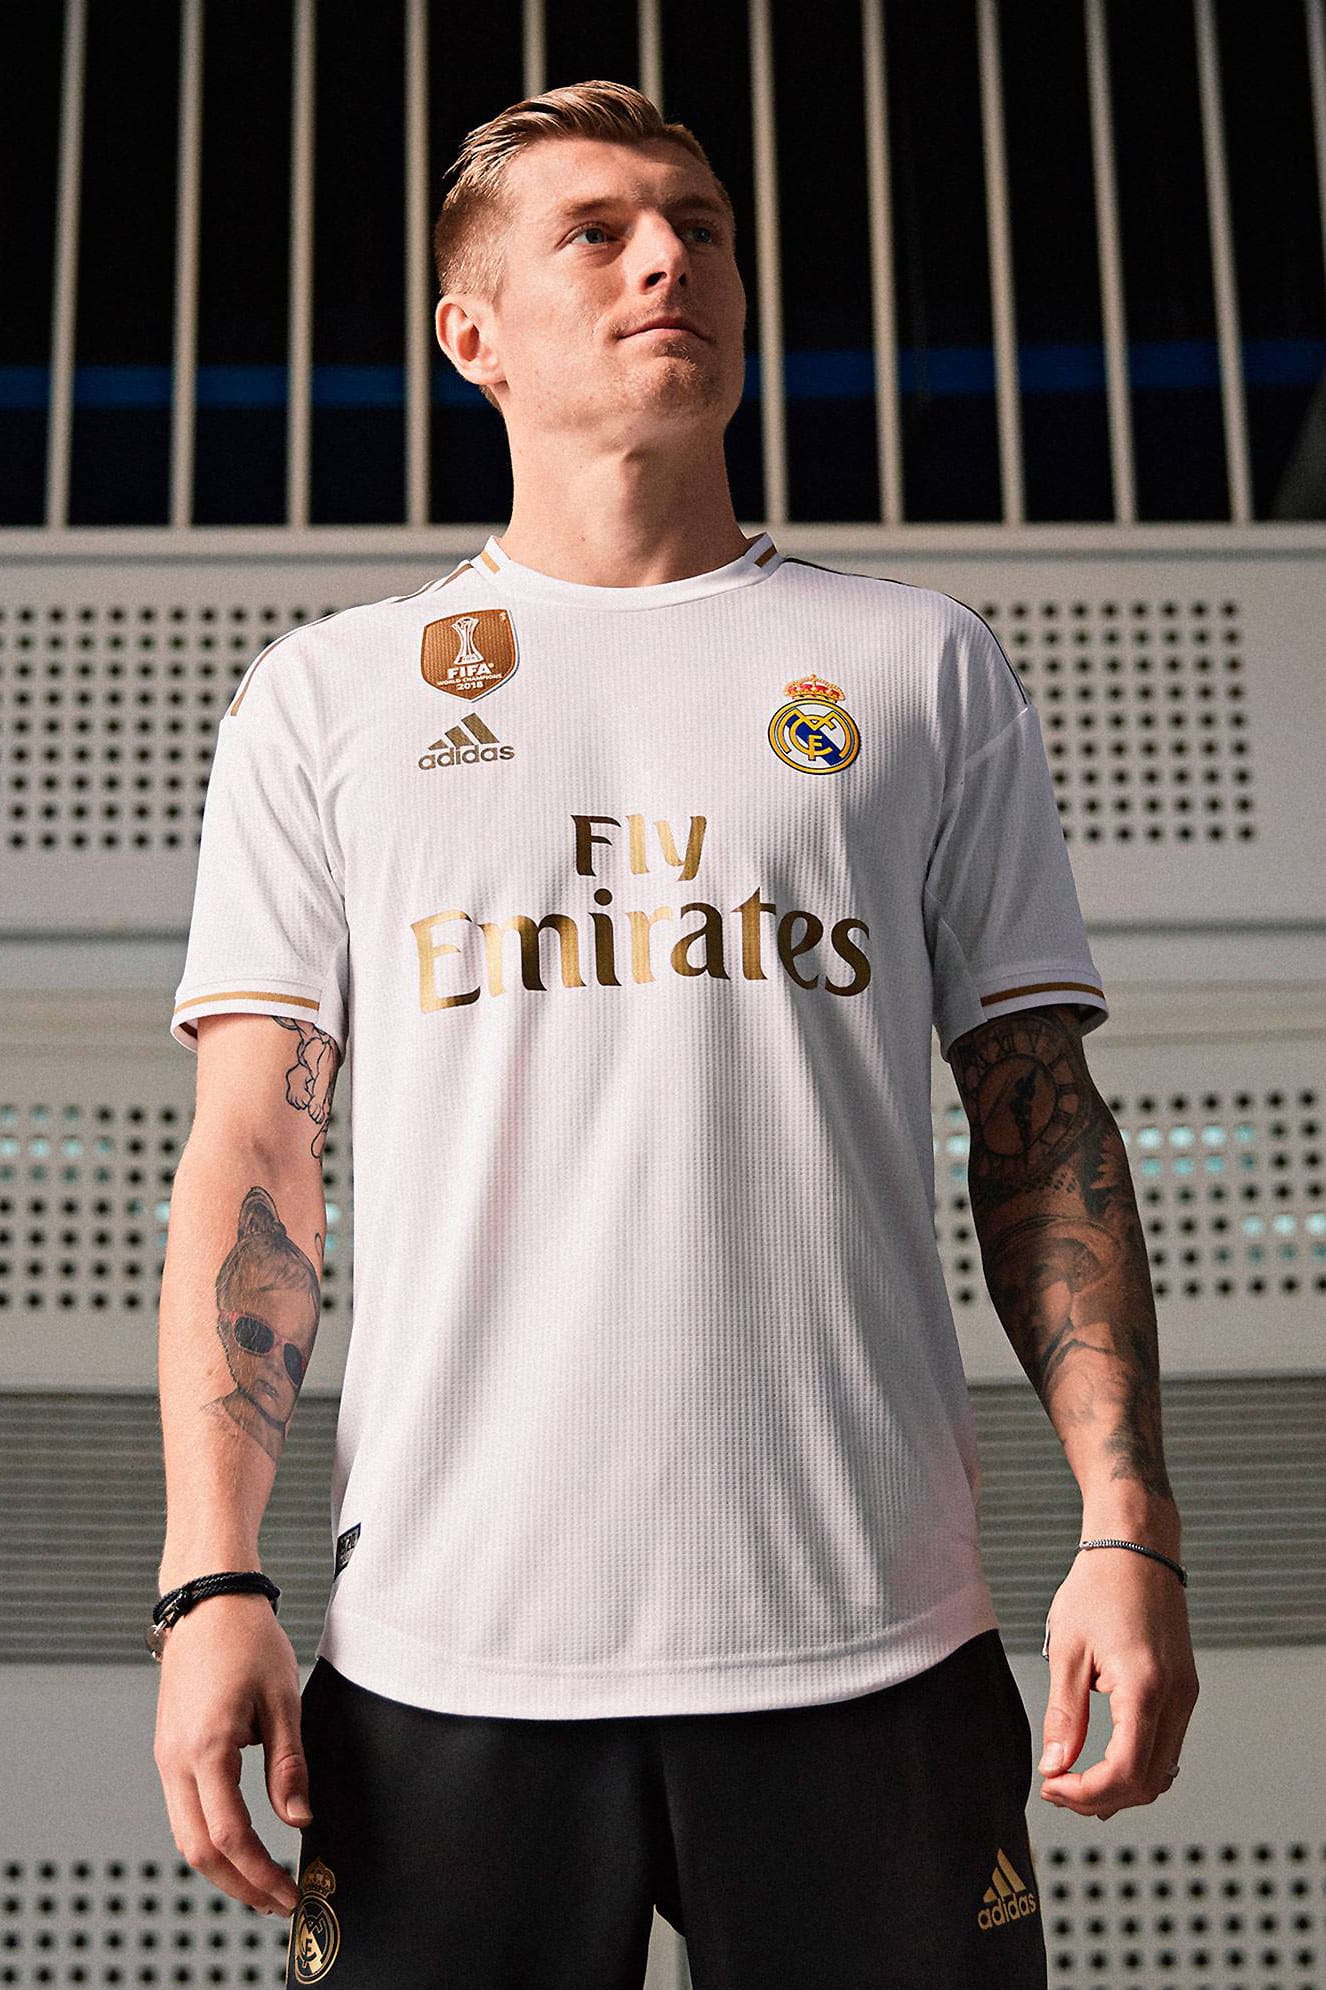 new jersey real madrid 2019